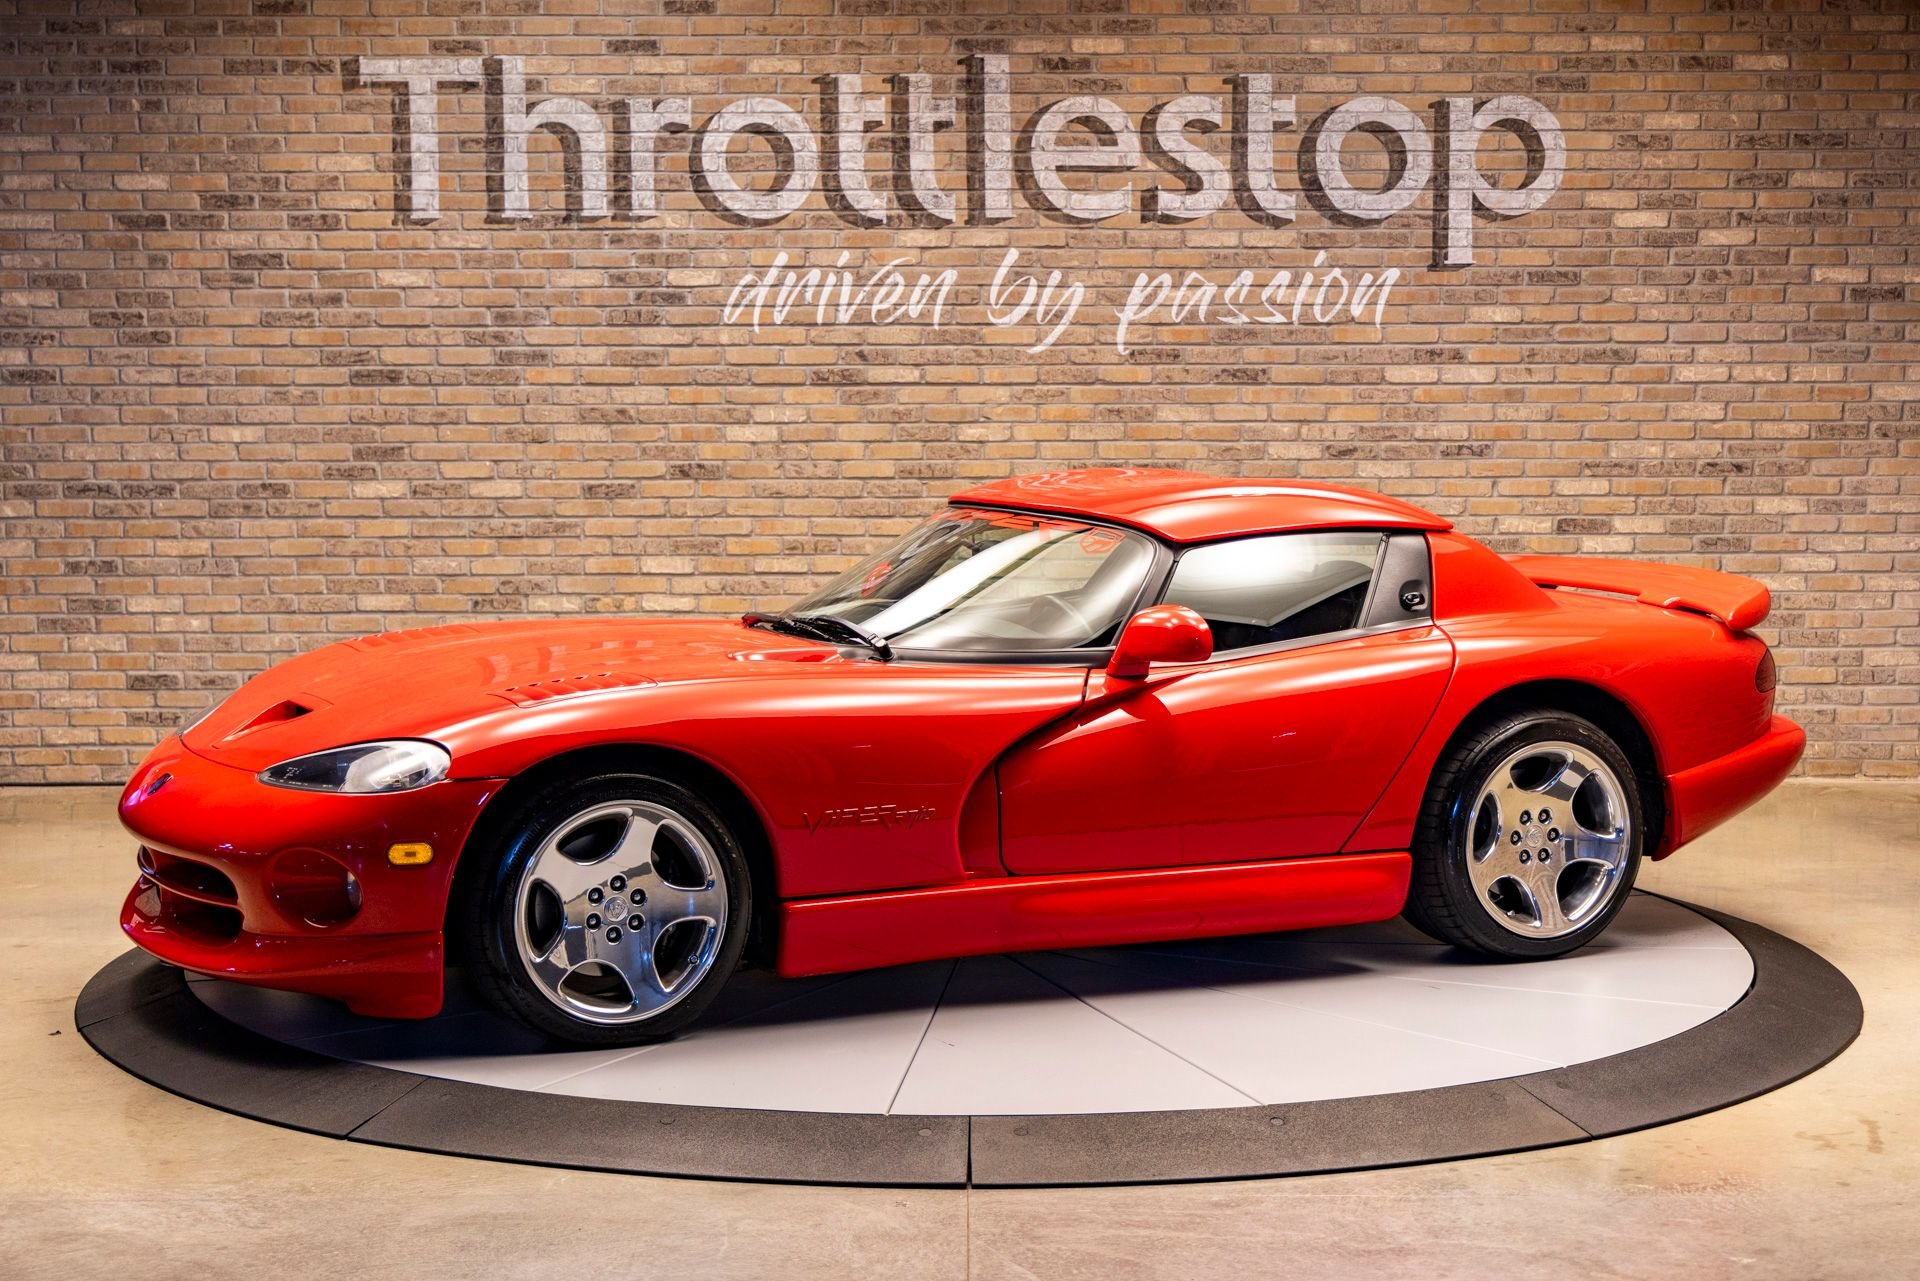 813162 | 2001 Dodge Viper RT/10 Convertible | Throttlestop | Automotive and Motorcycle Consignment Dealer